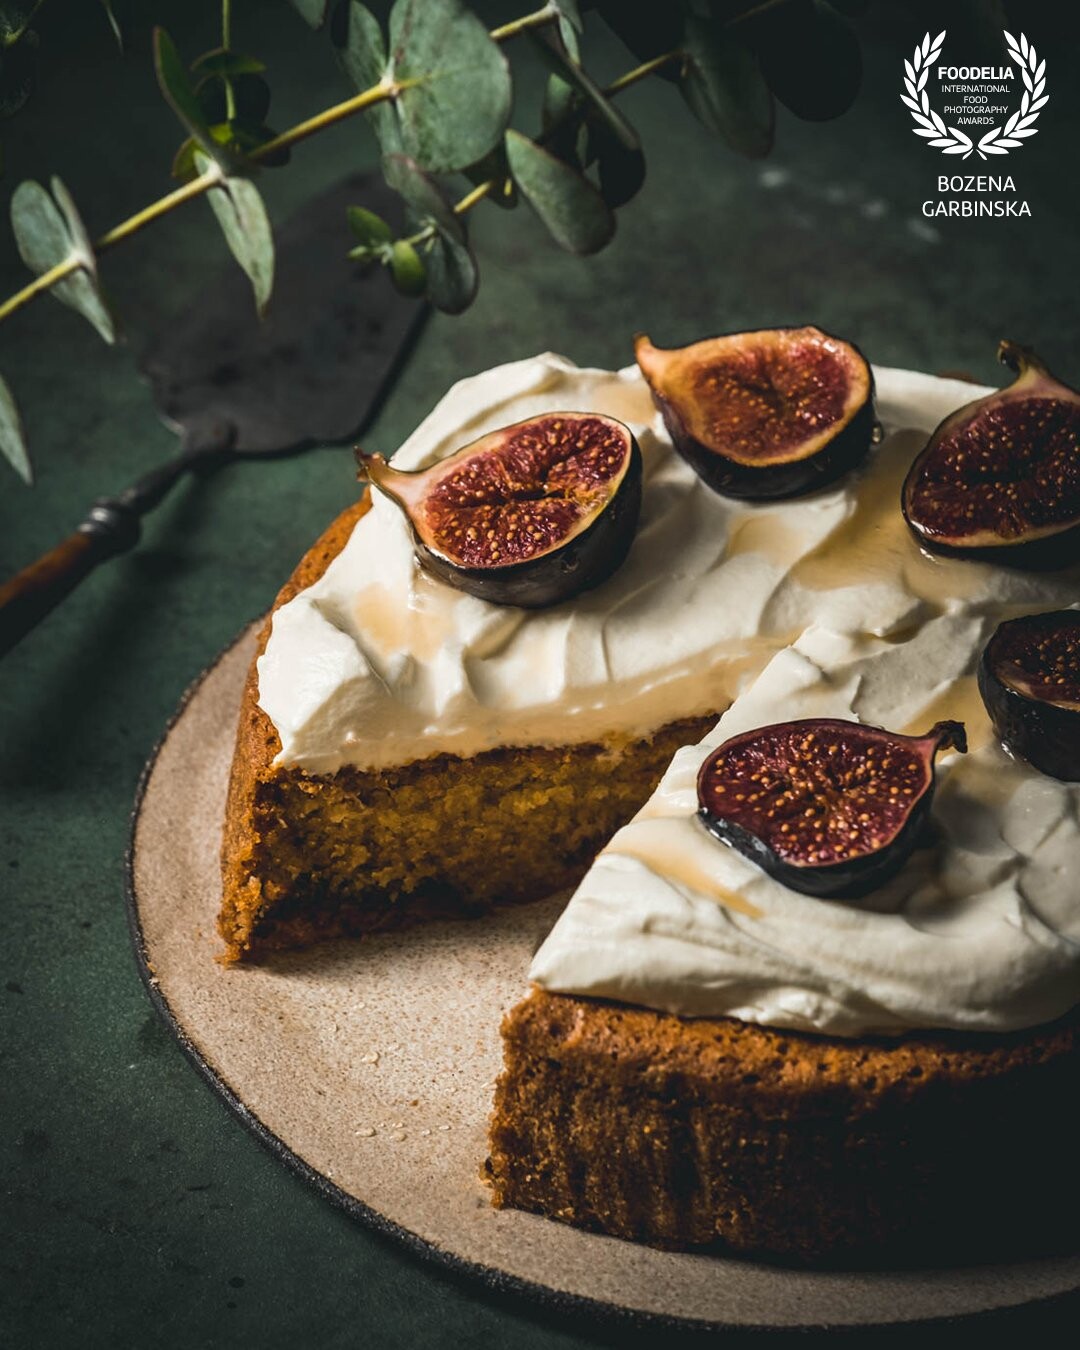 The hero of the photo is the gluten-free cake with mascarpone frosting and caramelized figs. I wanted to show the mood of the afternoon light.